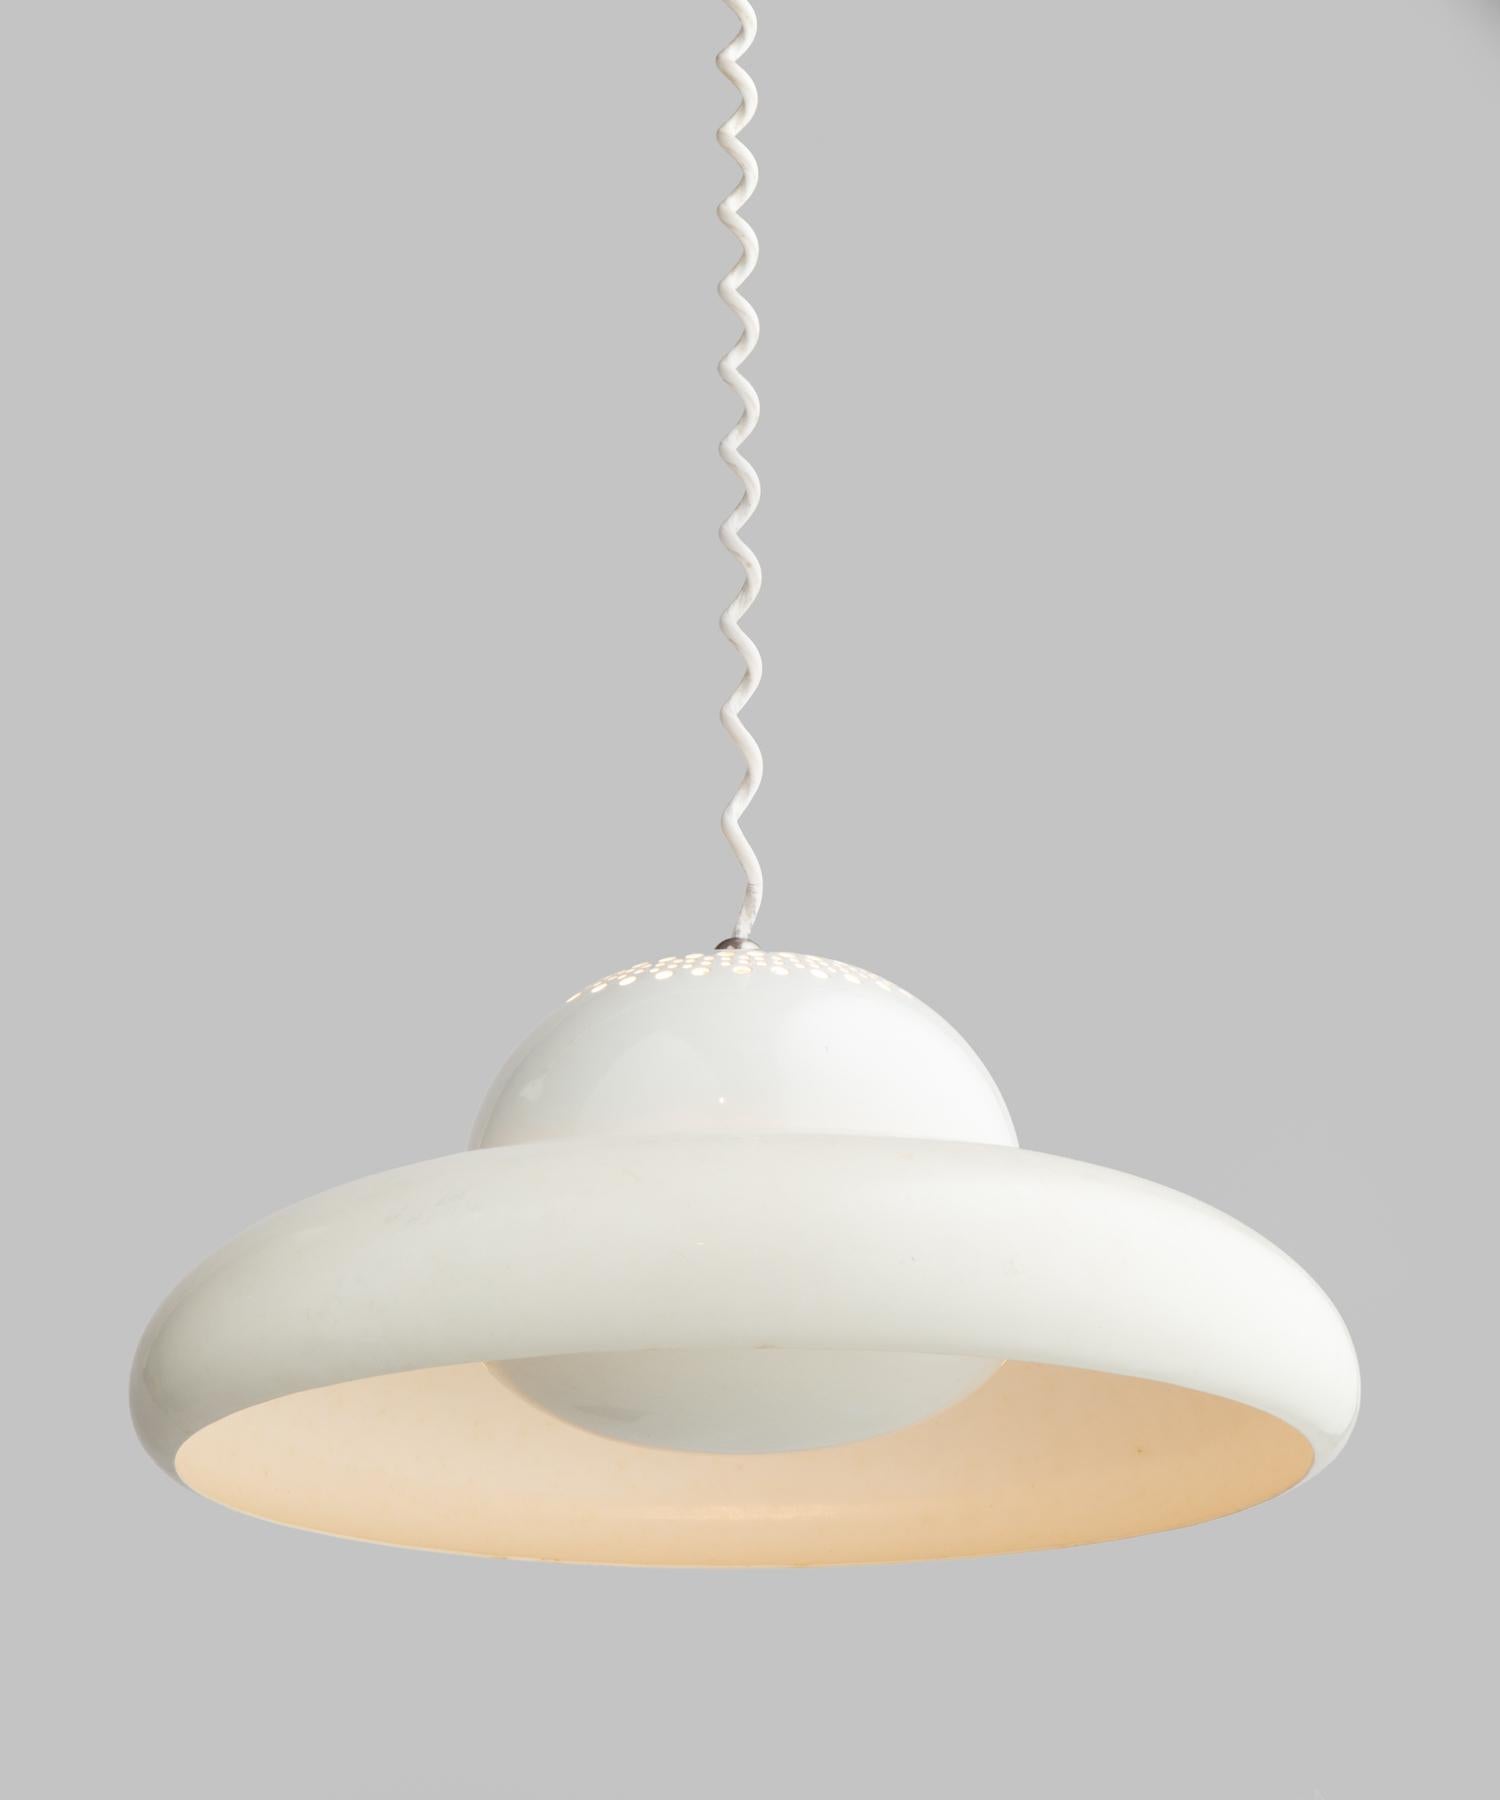 Fior di Loto pendant by Tobia Scarpa, Italy, circa 1963.

Minimal circular form with generous curves and curled wire. Produced by Flos.